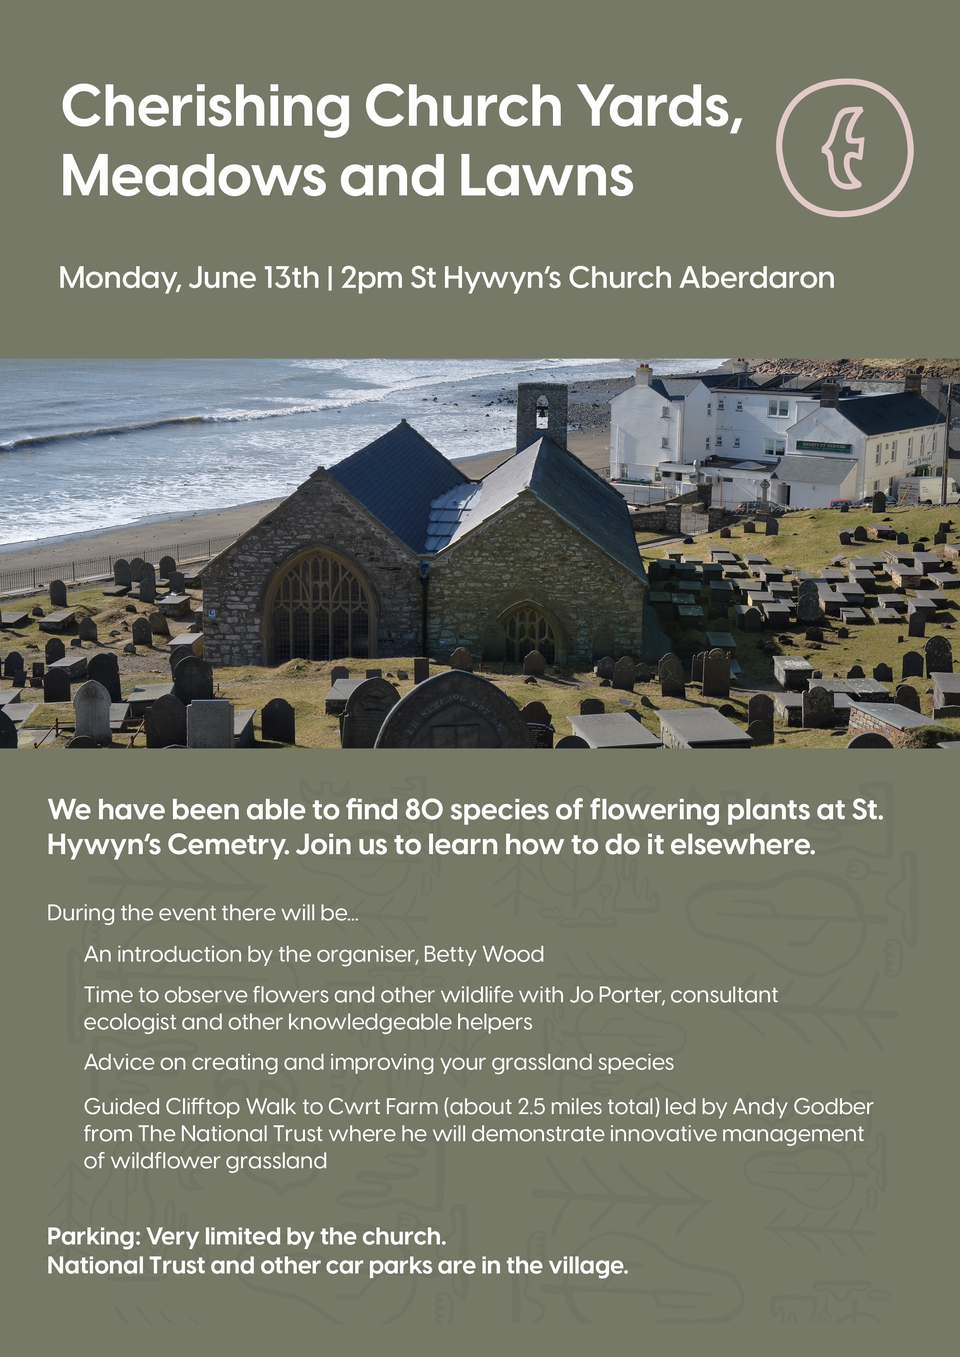 Poster with information about Bro Enlli's Cherishing Churchyards project on June 13